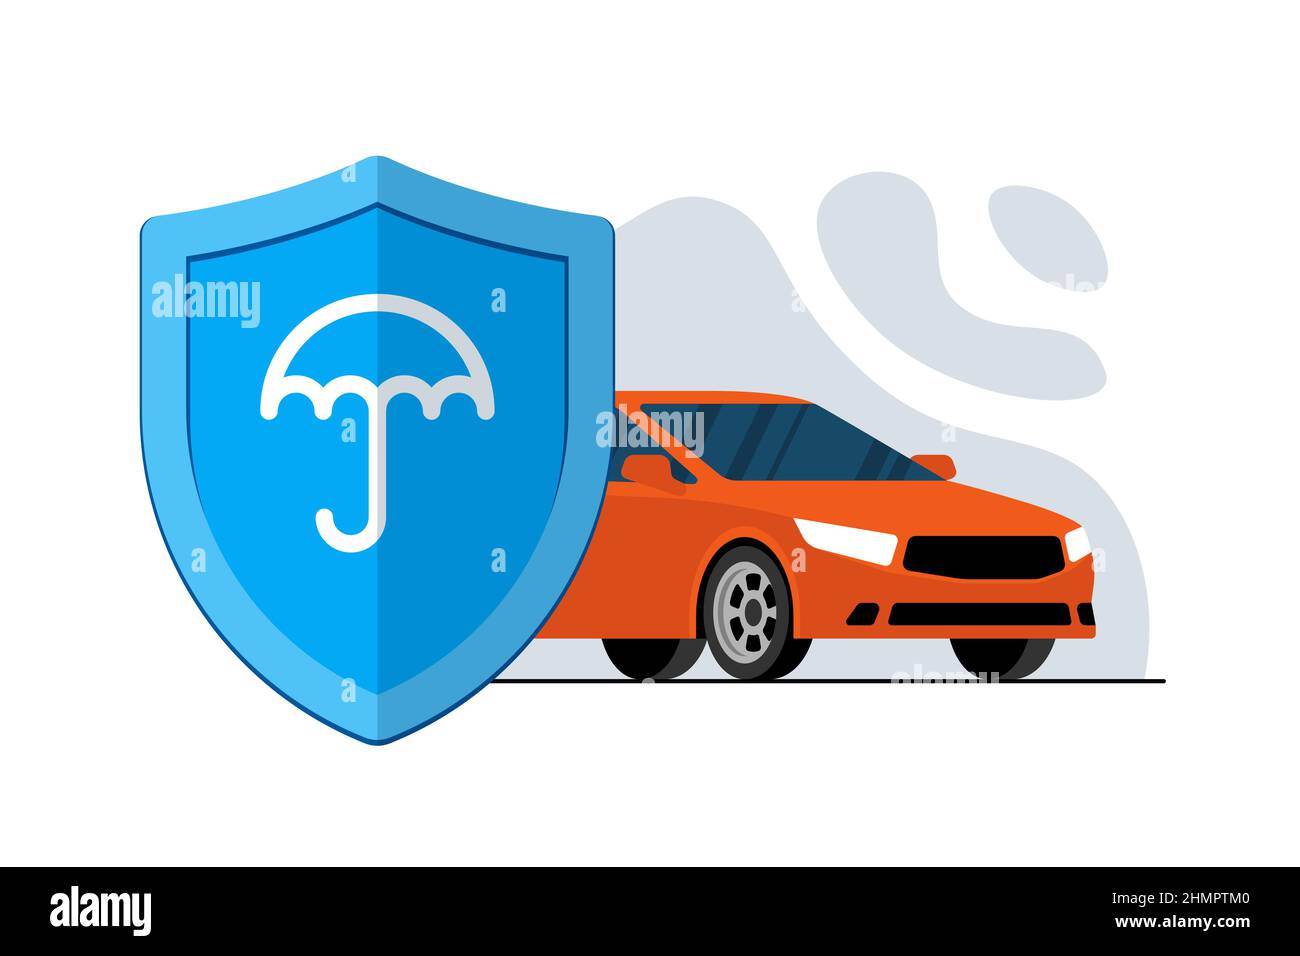 Car insurance or security banner concept. Umbrella on blue shield sign with automobile. Transport protection and safety advertising design. Auto vehicle guard service vector eps illustration Stock Vector